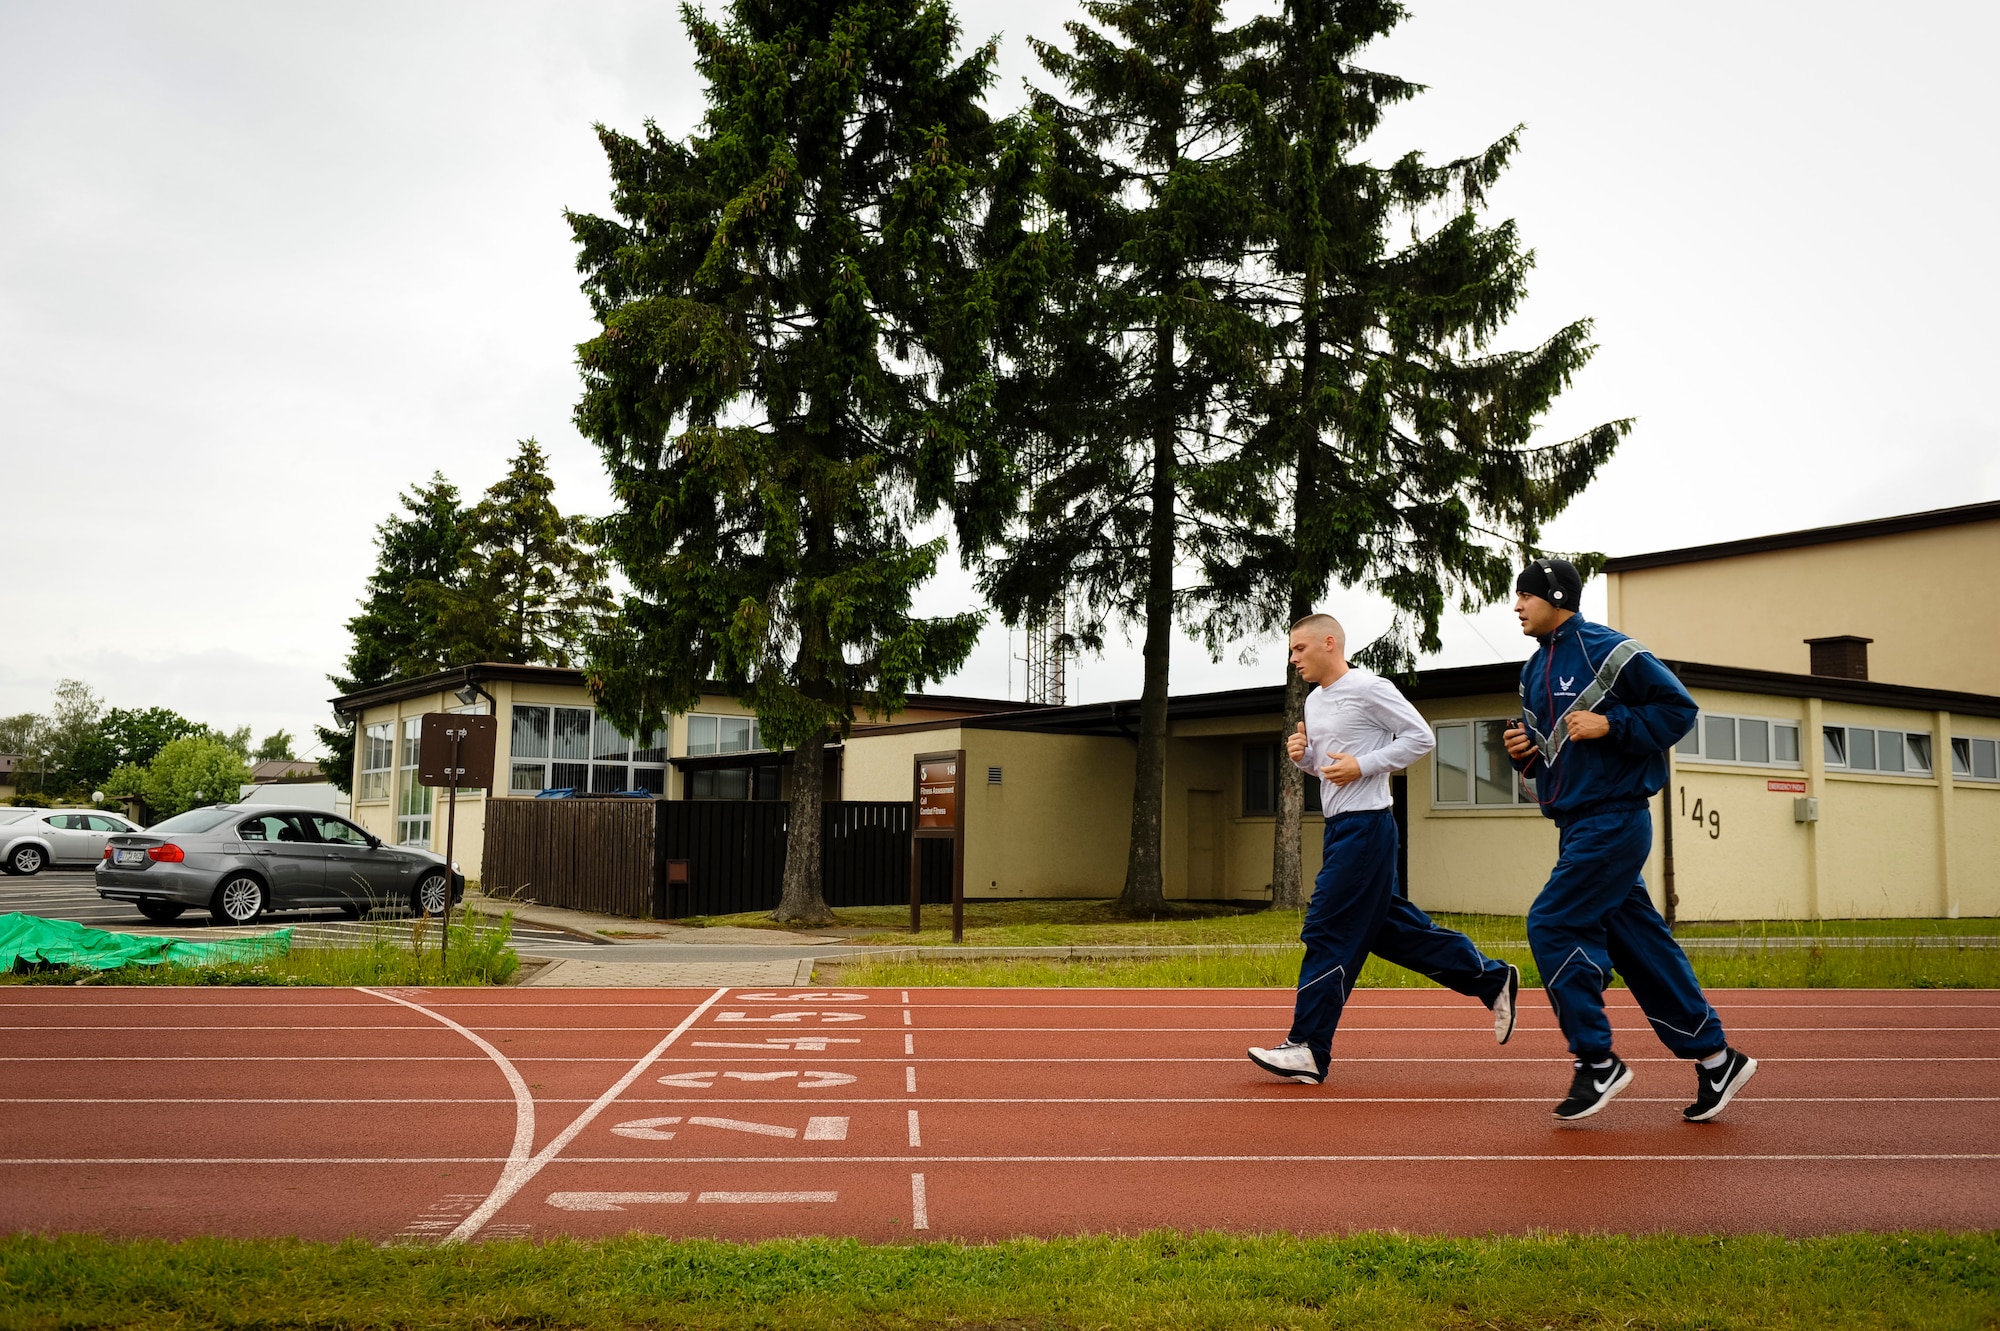 SPANGDAHLEM AIR BASE, Germany – Participants jog around the base track during a Wounded Warrior walk-a-thon here June 7. More than 230 people participated in the event, which raised funds for wounded warrior programs at Landstuhl Regional Medical Center. (U.S. Air Force photo by Staff Sgt. Nathanael Callon/Released)